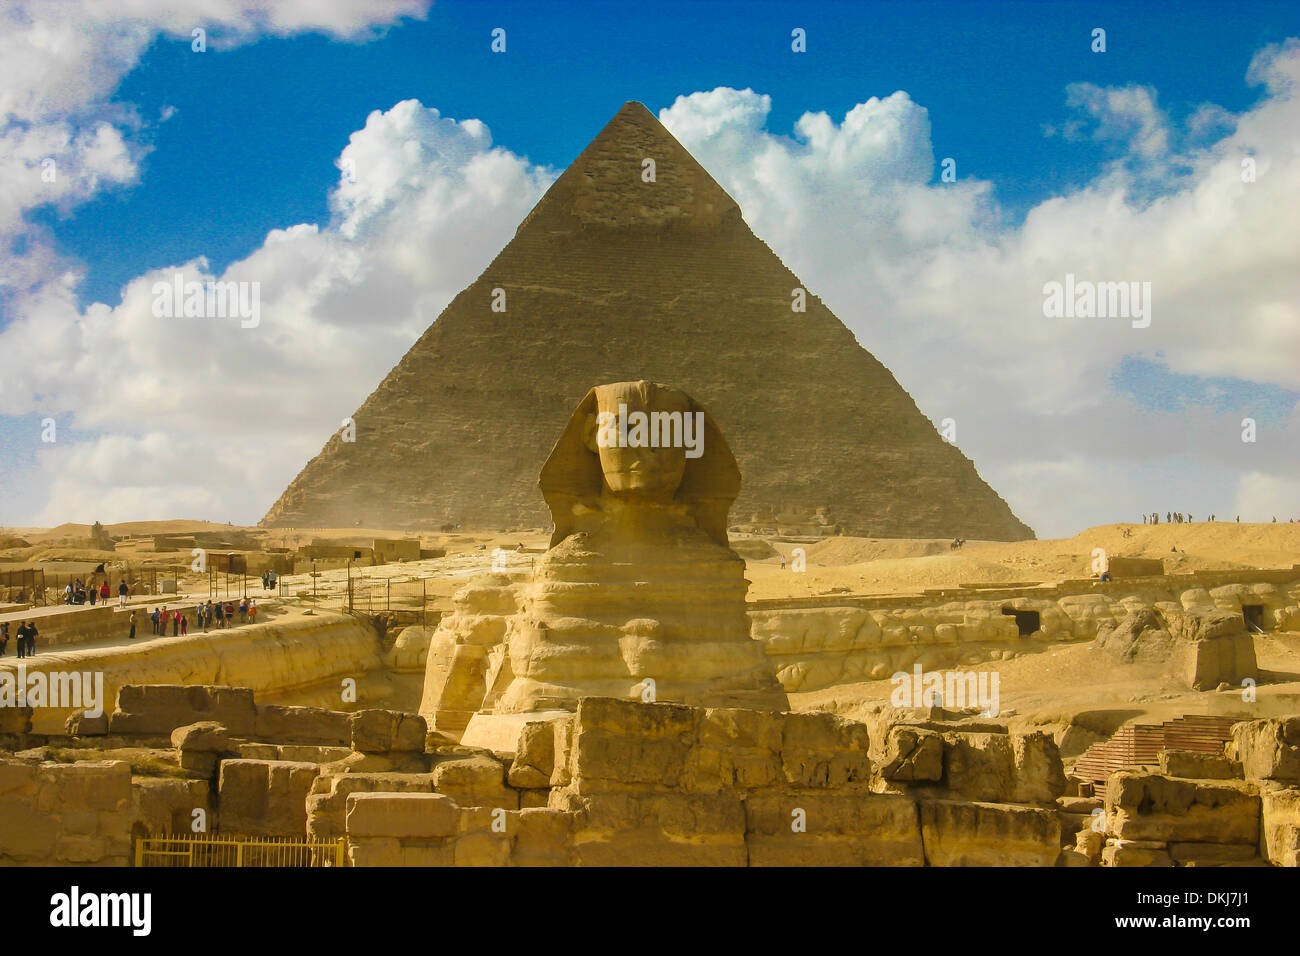 Great Sphinx in front of The Pyramid of Khafre, Great Pyramids of Giza near Cairo, Egypt. Stock Photo